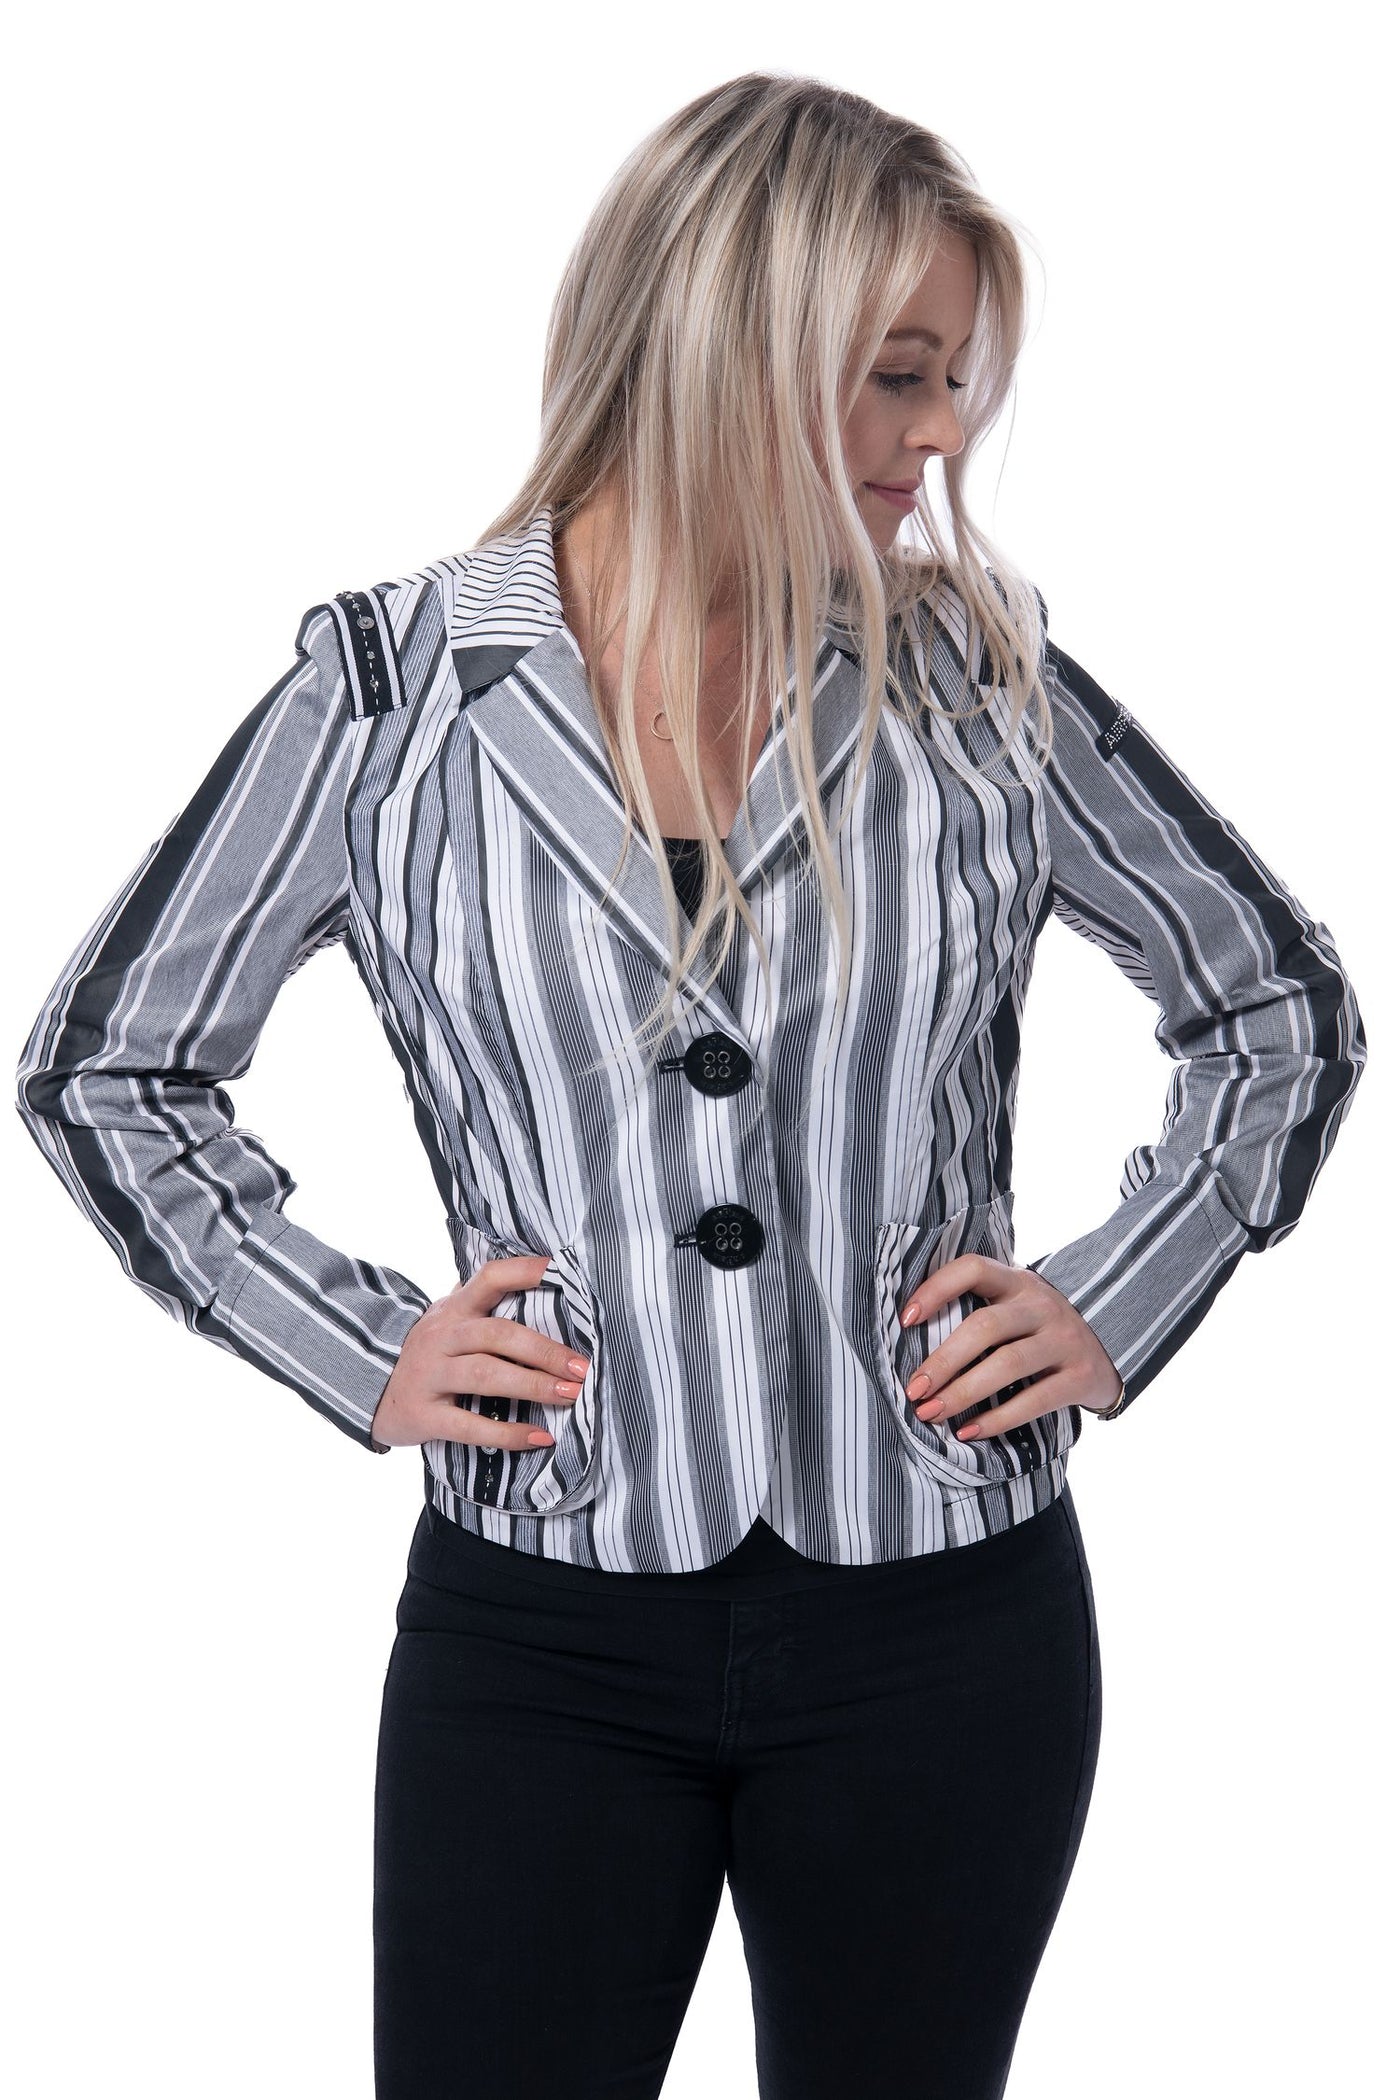 Airfield black and white stripped jacket